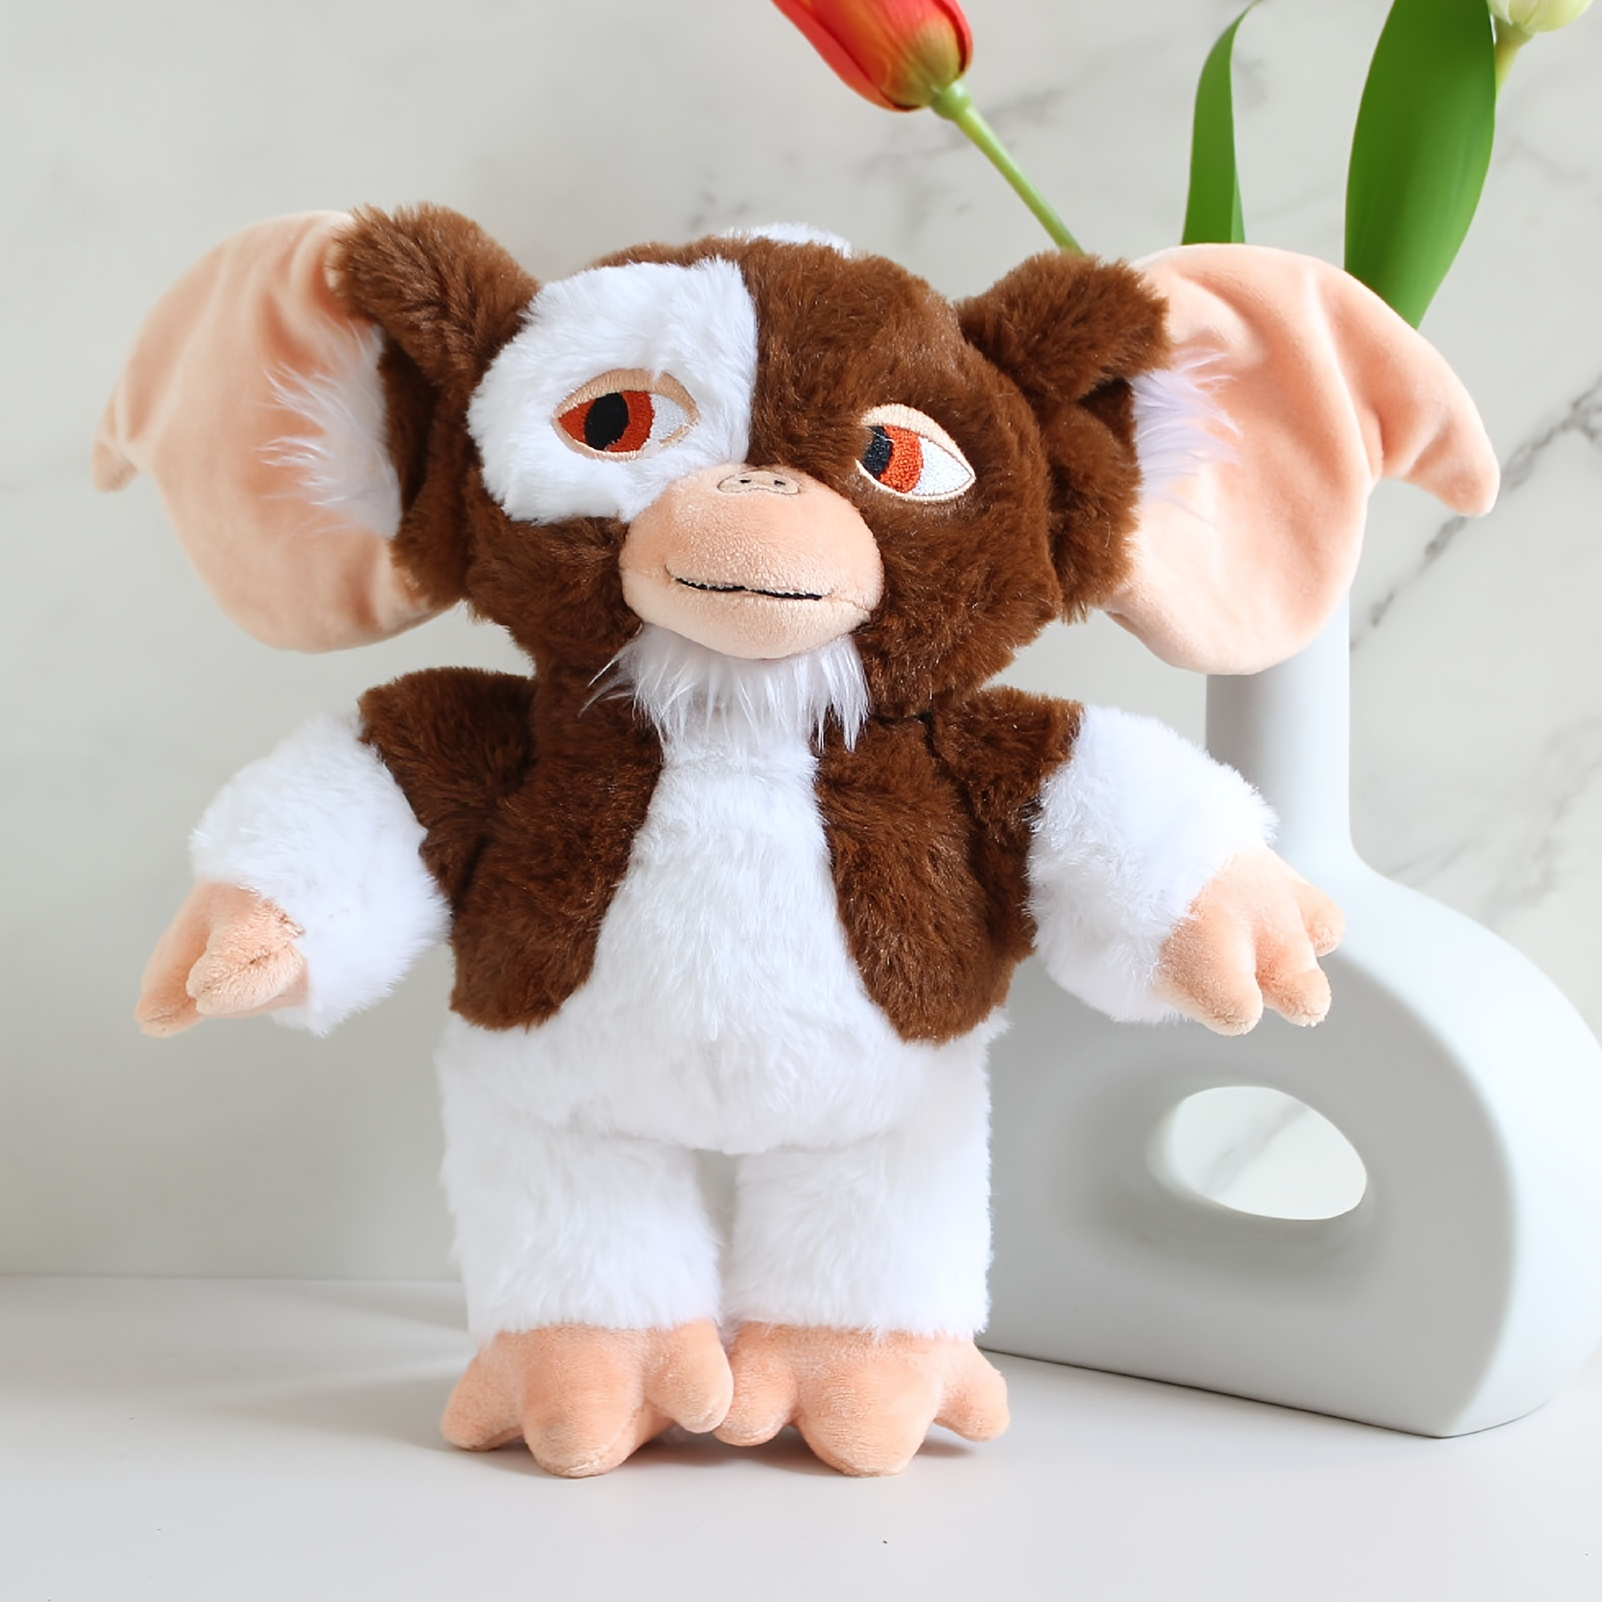 

27cm/10.6in Gremlins Gizmo Plush Toy Soft Fluffy Movie Character Gremlins 3 Stuffed Plush Dolls Gifts